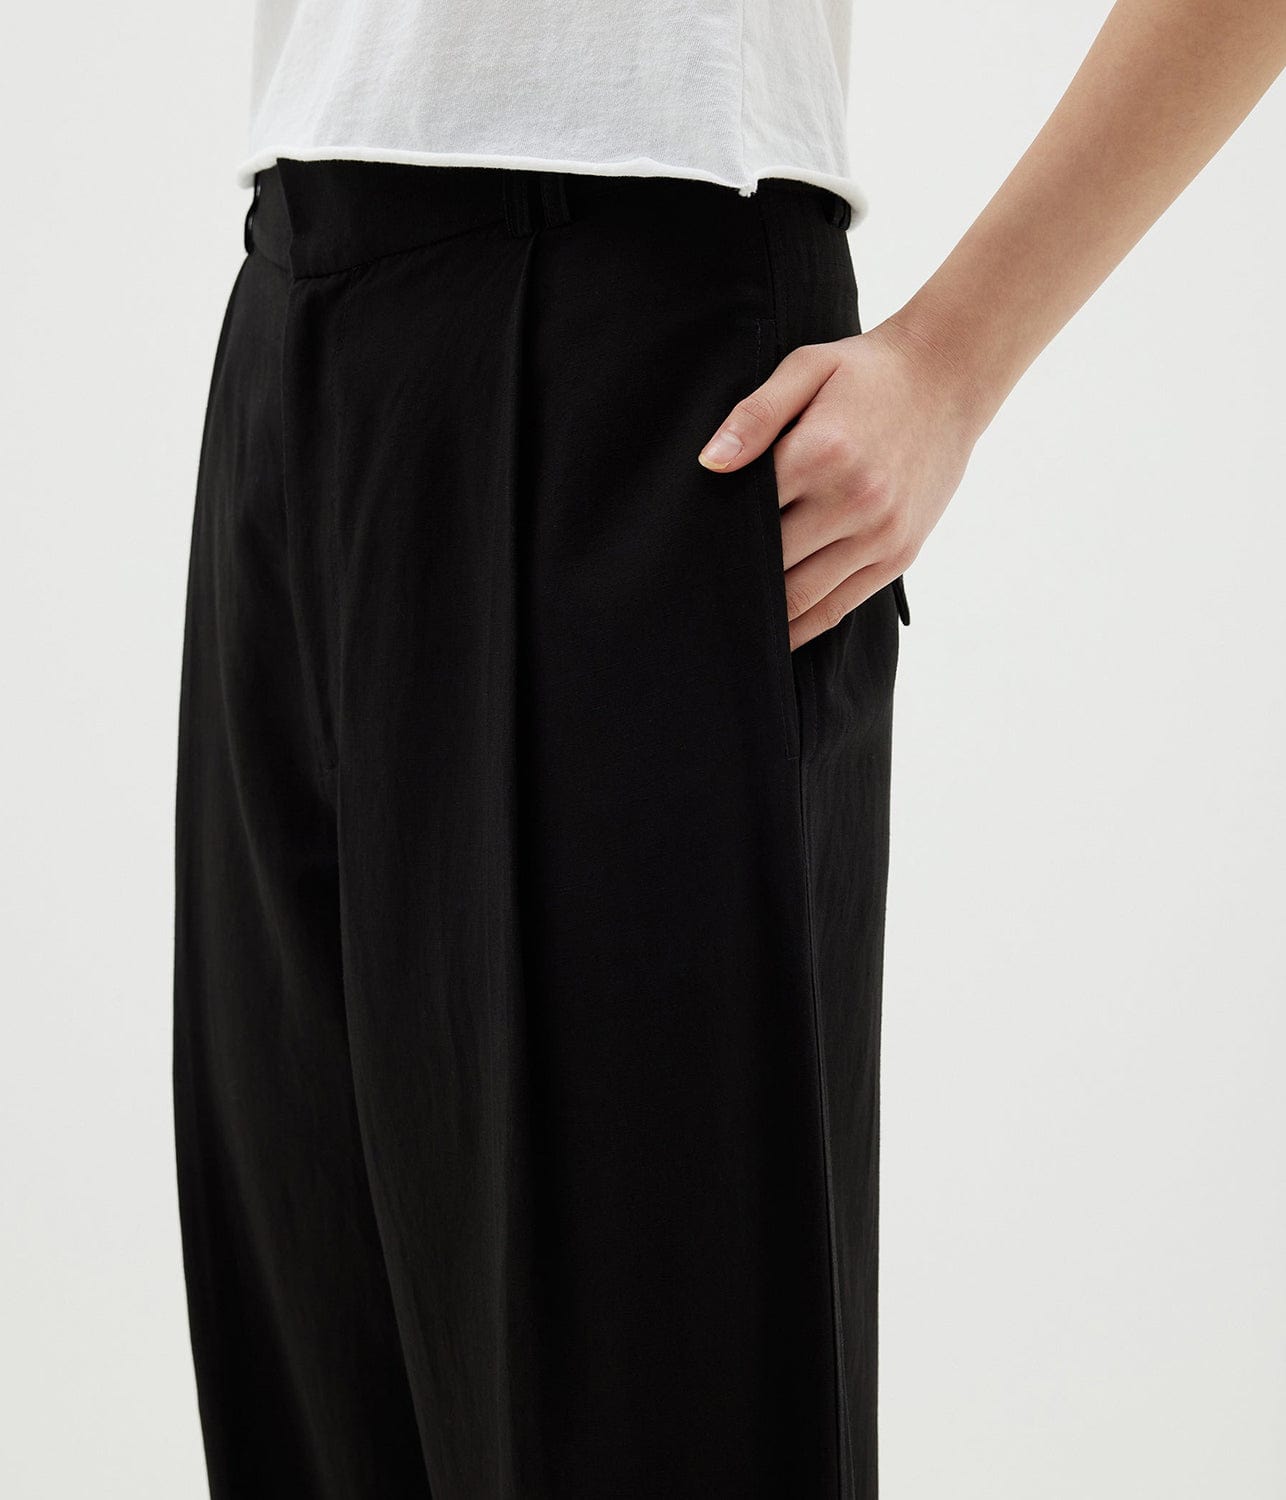 Pleat Front Wide-Leg Belted Pants in Black - Retro, Indie and Unique Fashion